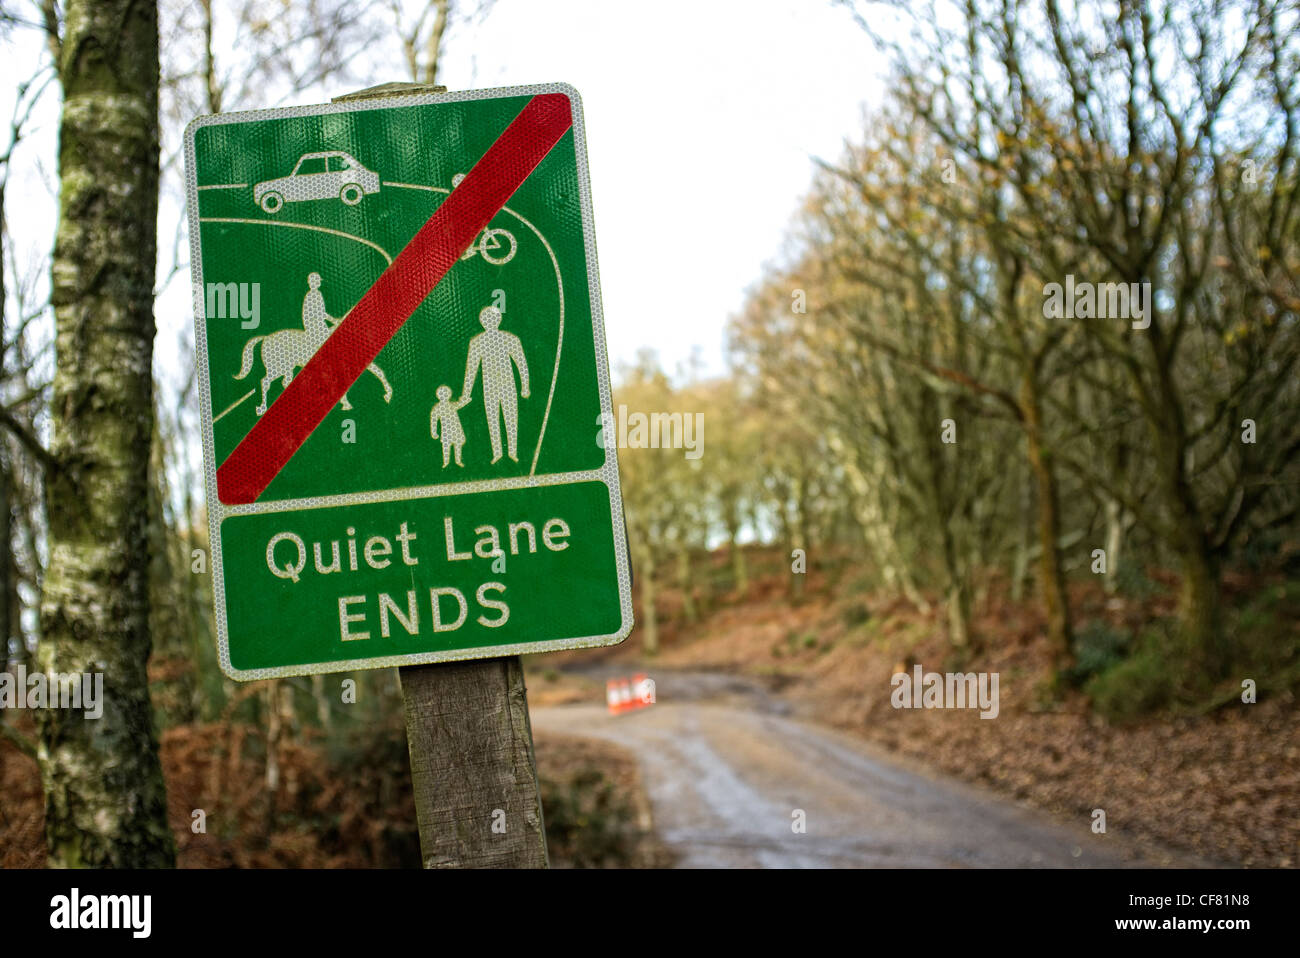 Quiet lane ends No horse riding walking cycling cars Stock Photo